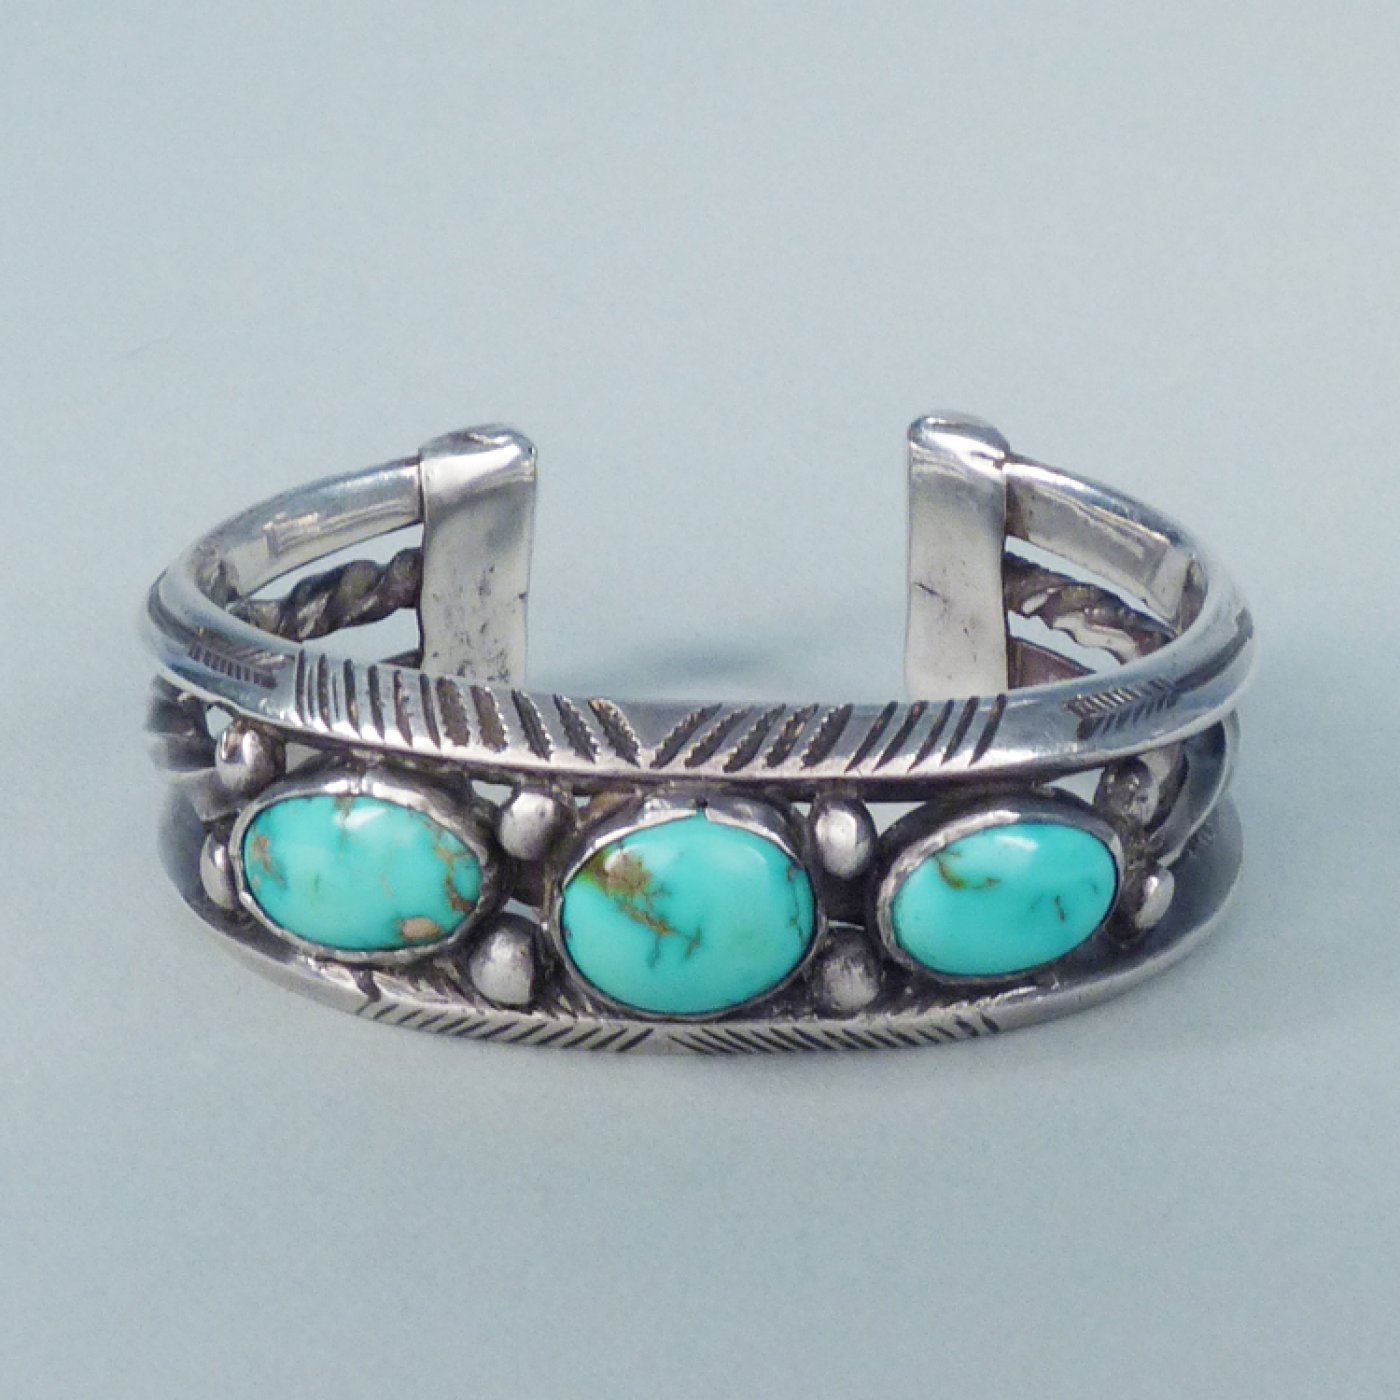 Stamped Silver Bracelet with Three Turquoise Cabochons, c.1910-1920 ...